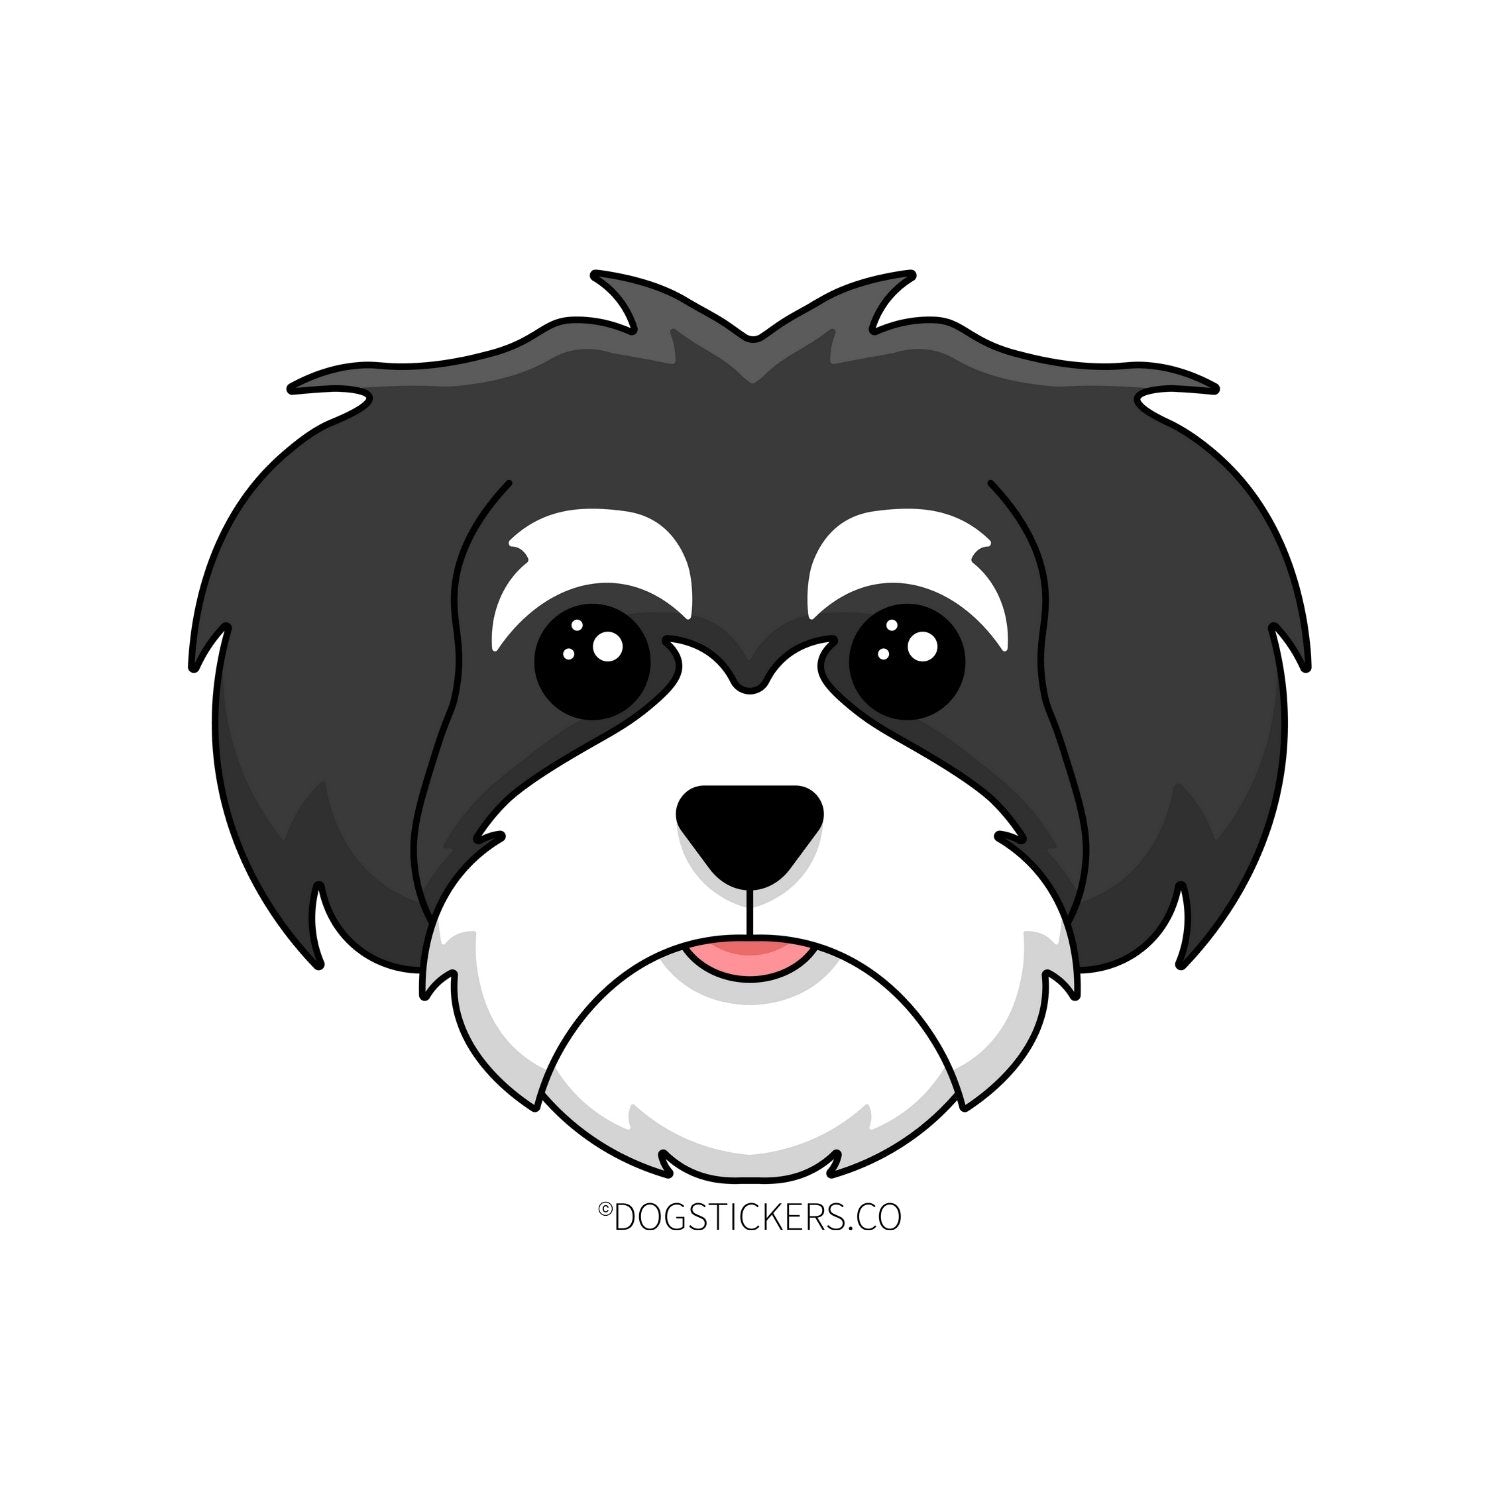 Toby - Dogstickers.co